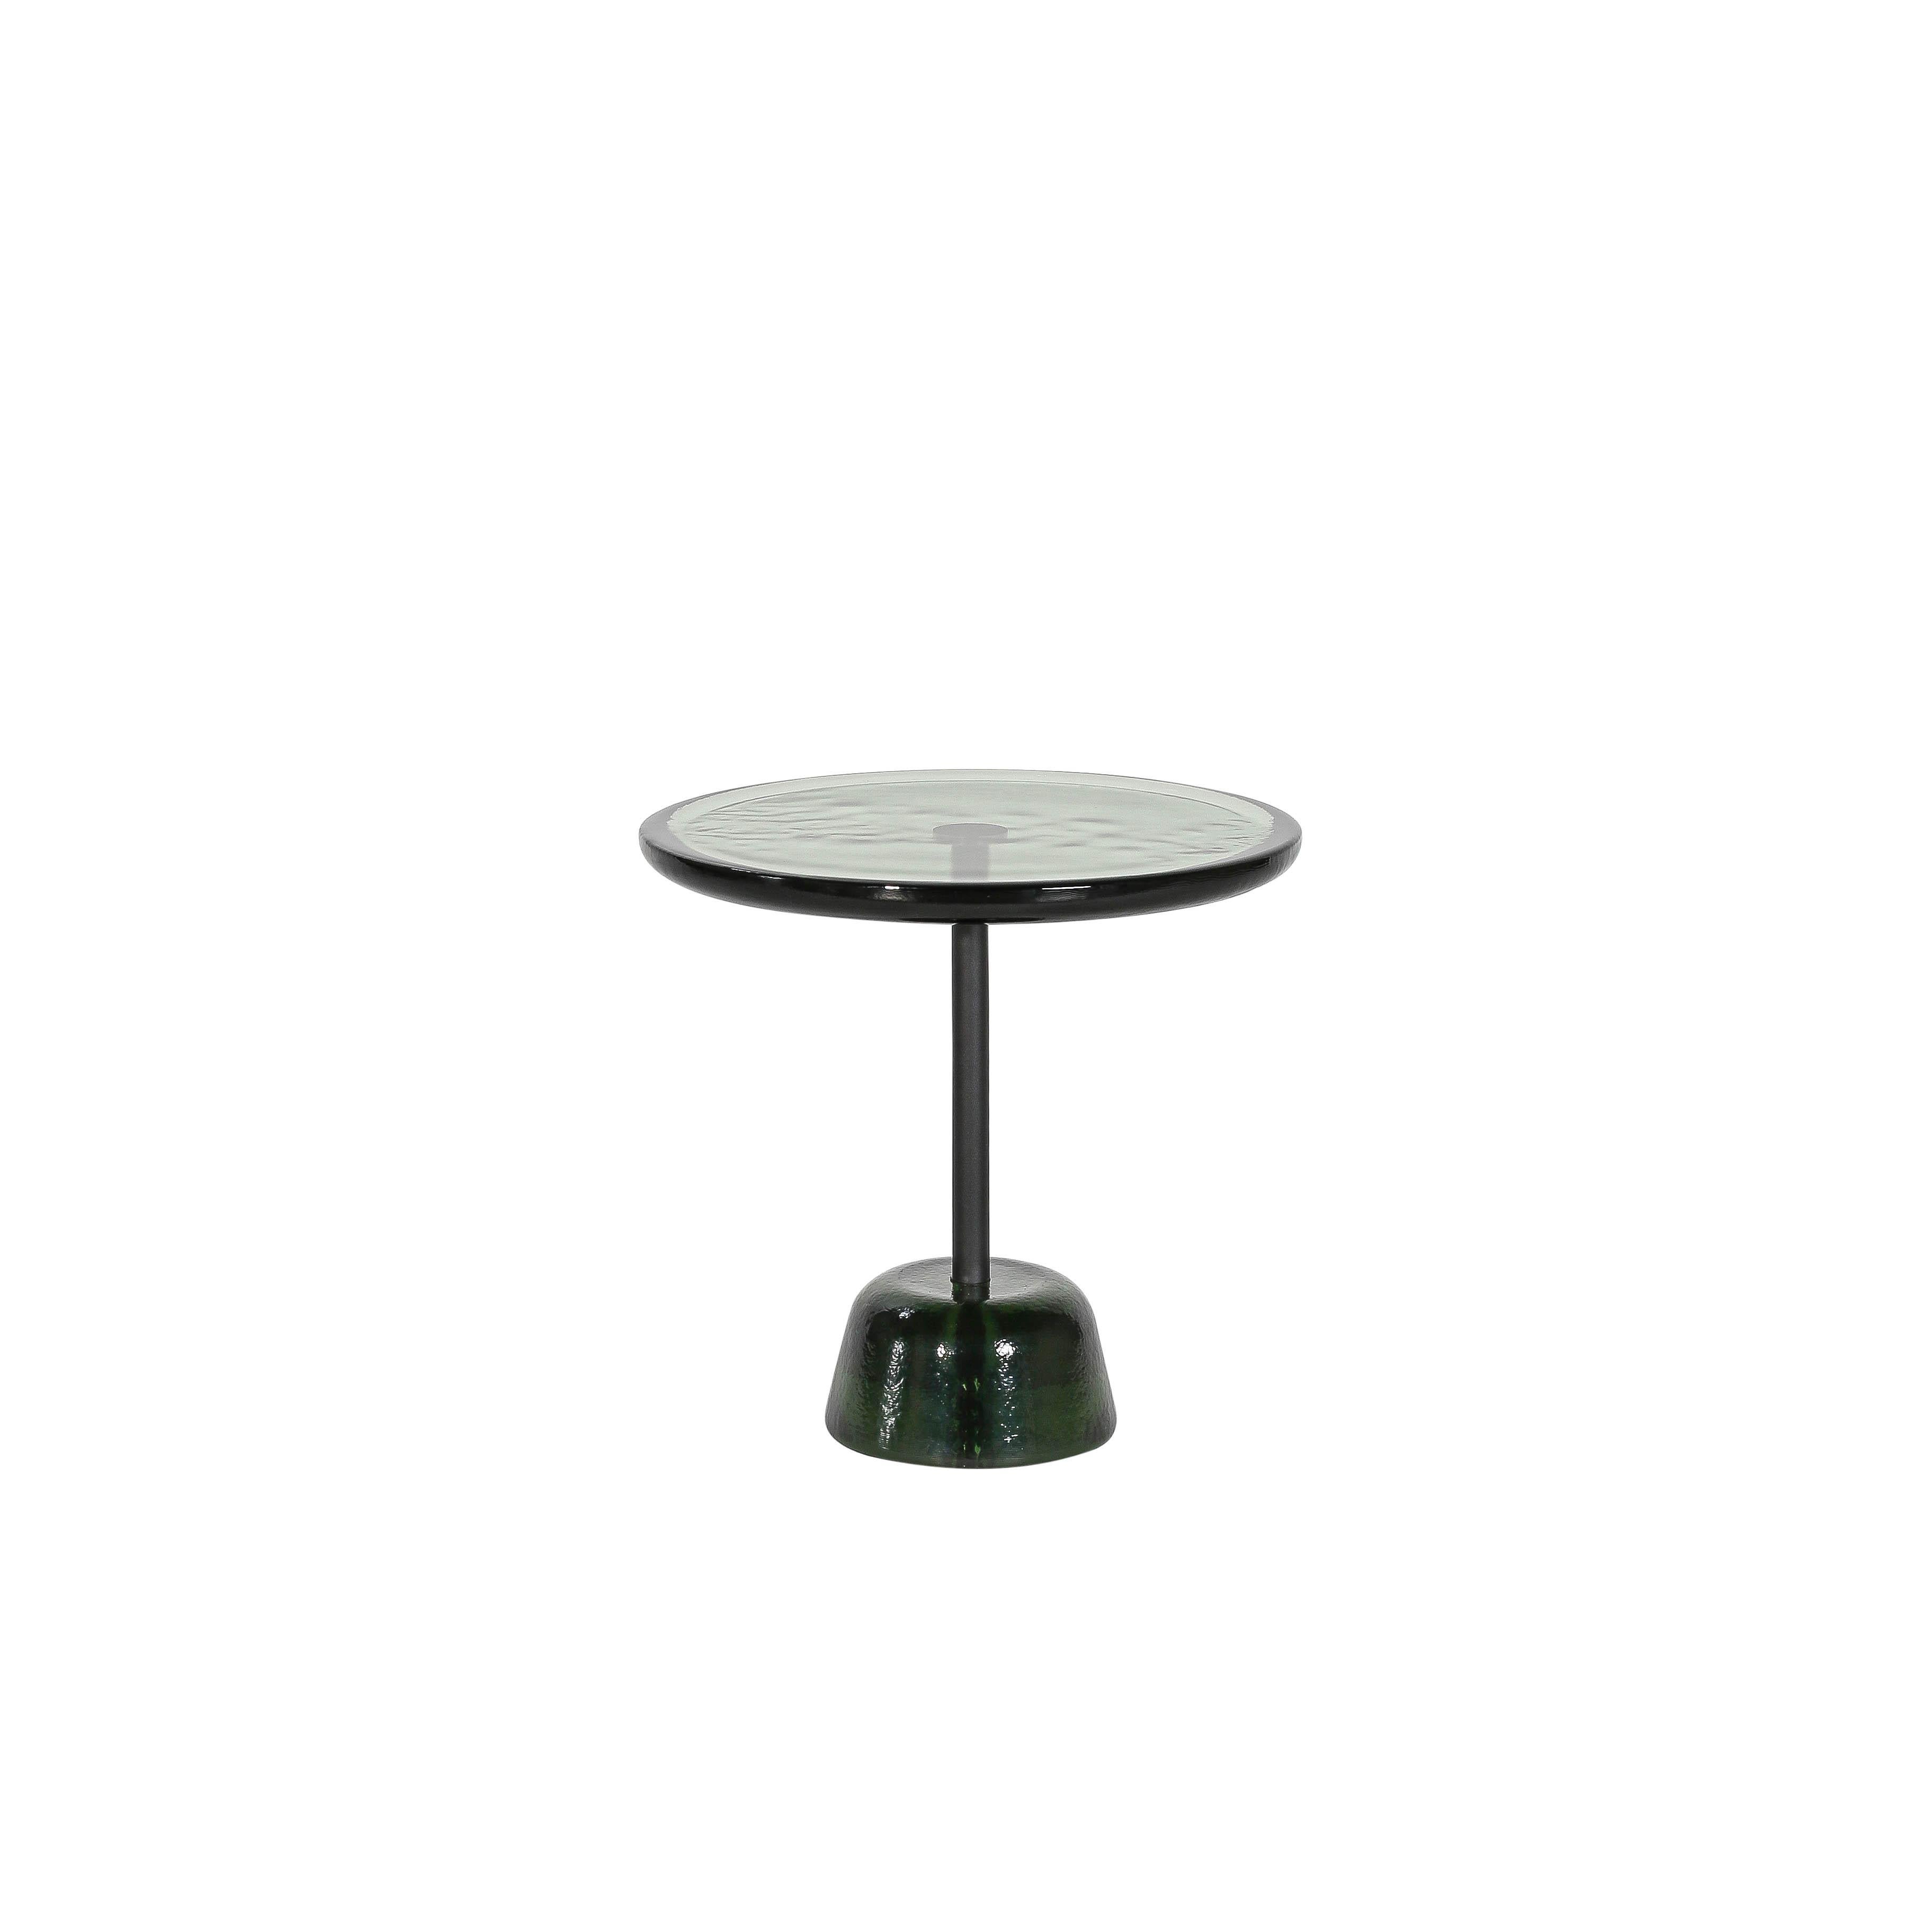 Pina low green black side table by Pulpo
Dimensions: D 44 x H 42 cm
Materials: glass; brass and steel

Also available in different colours.

Sebastian Herkner’s distinctively tall, skinny side table series pina is inspired by the abstract